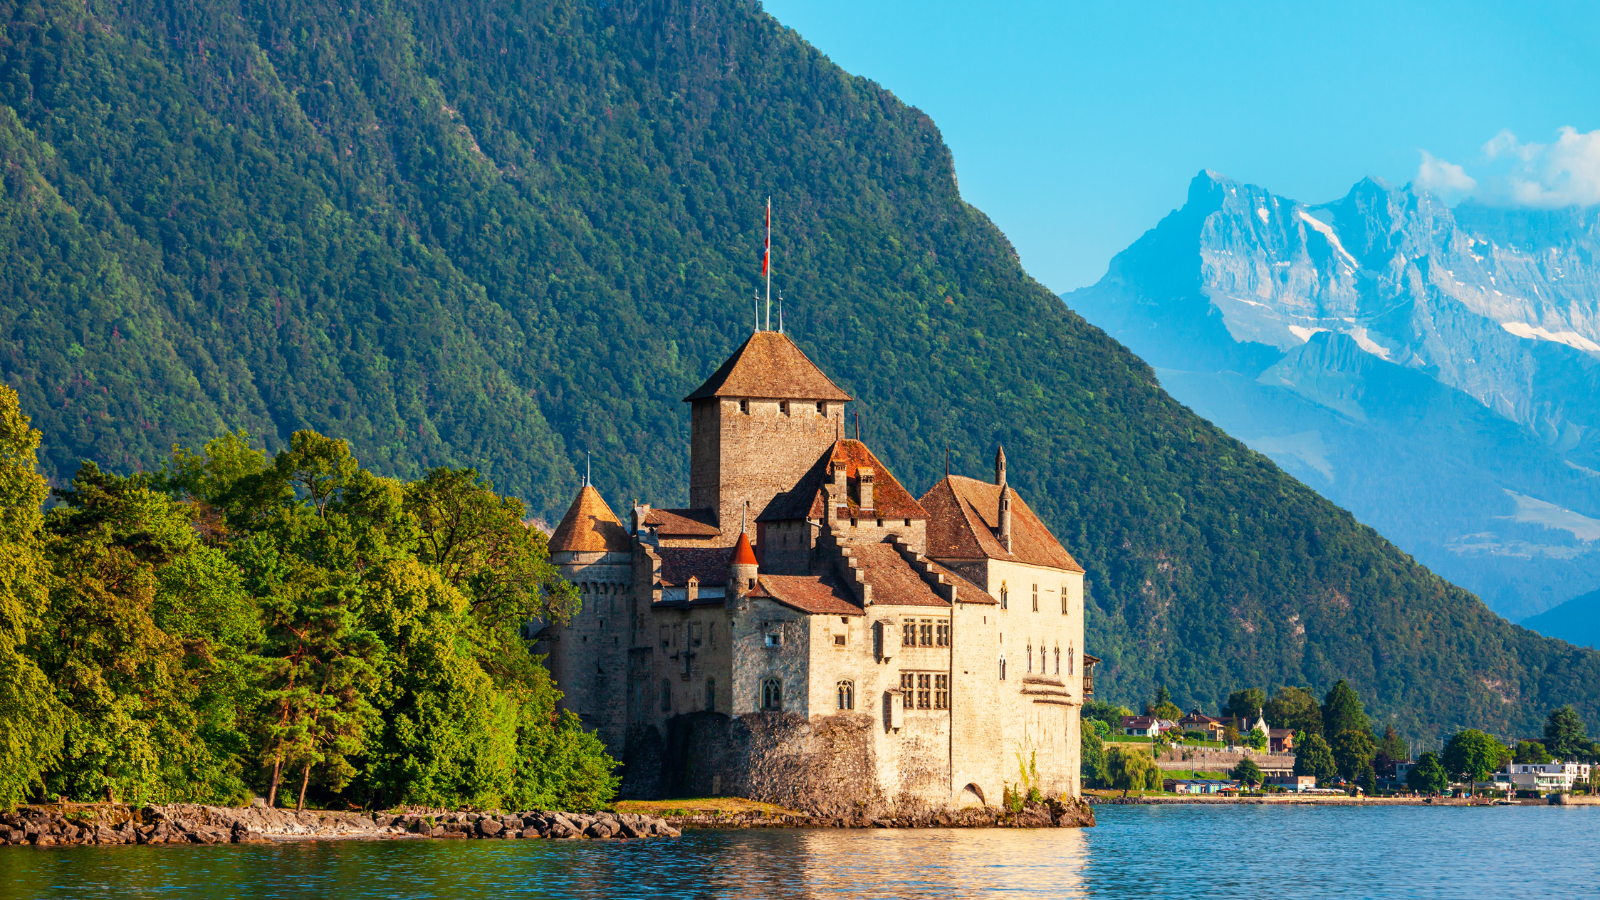 The fifth thing in the list of 10 best things to do in Switzerland - Visit Chillon castle